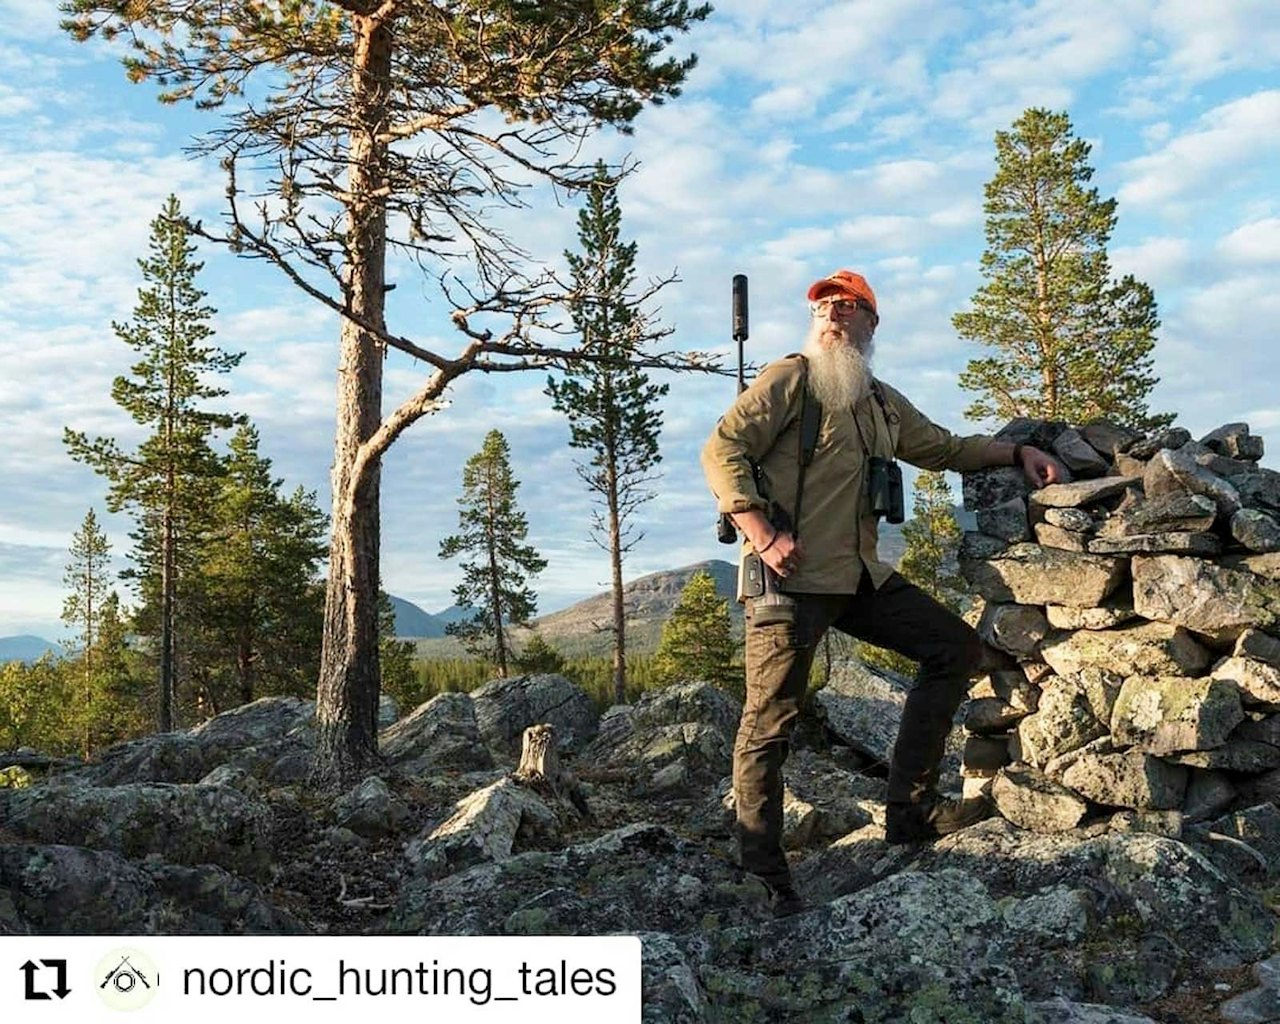 @nordic_hunting_tales: Where I grew up and learned to hunt, we often hunted reindeer down in the forest. You surely do not have that same view and it is more difficult to find the herds. However, by time you gather experience the hard way by failing: Where the animals will show up, depends on where they were spotted the day before, how the wind is, how far into the hunting season it is - along with other factors. Finding the animals where you guessed they would be, is as years pass by and numbers of animals shot piling up, almost as rewarding as shooting one. That is what hunting is to me. #jeger #reinsjakt #rendalen #hauskenlyddemper #kkcofnorway #seetheunseen #modernhuntsman #meateater #earnyourfood 